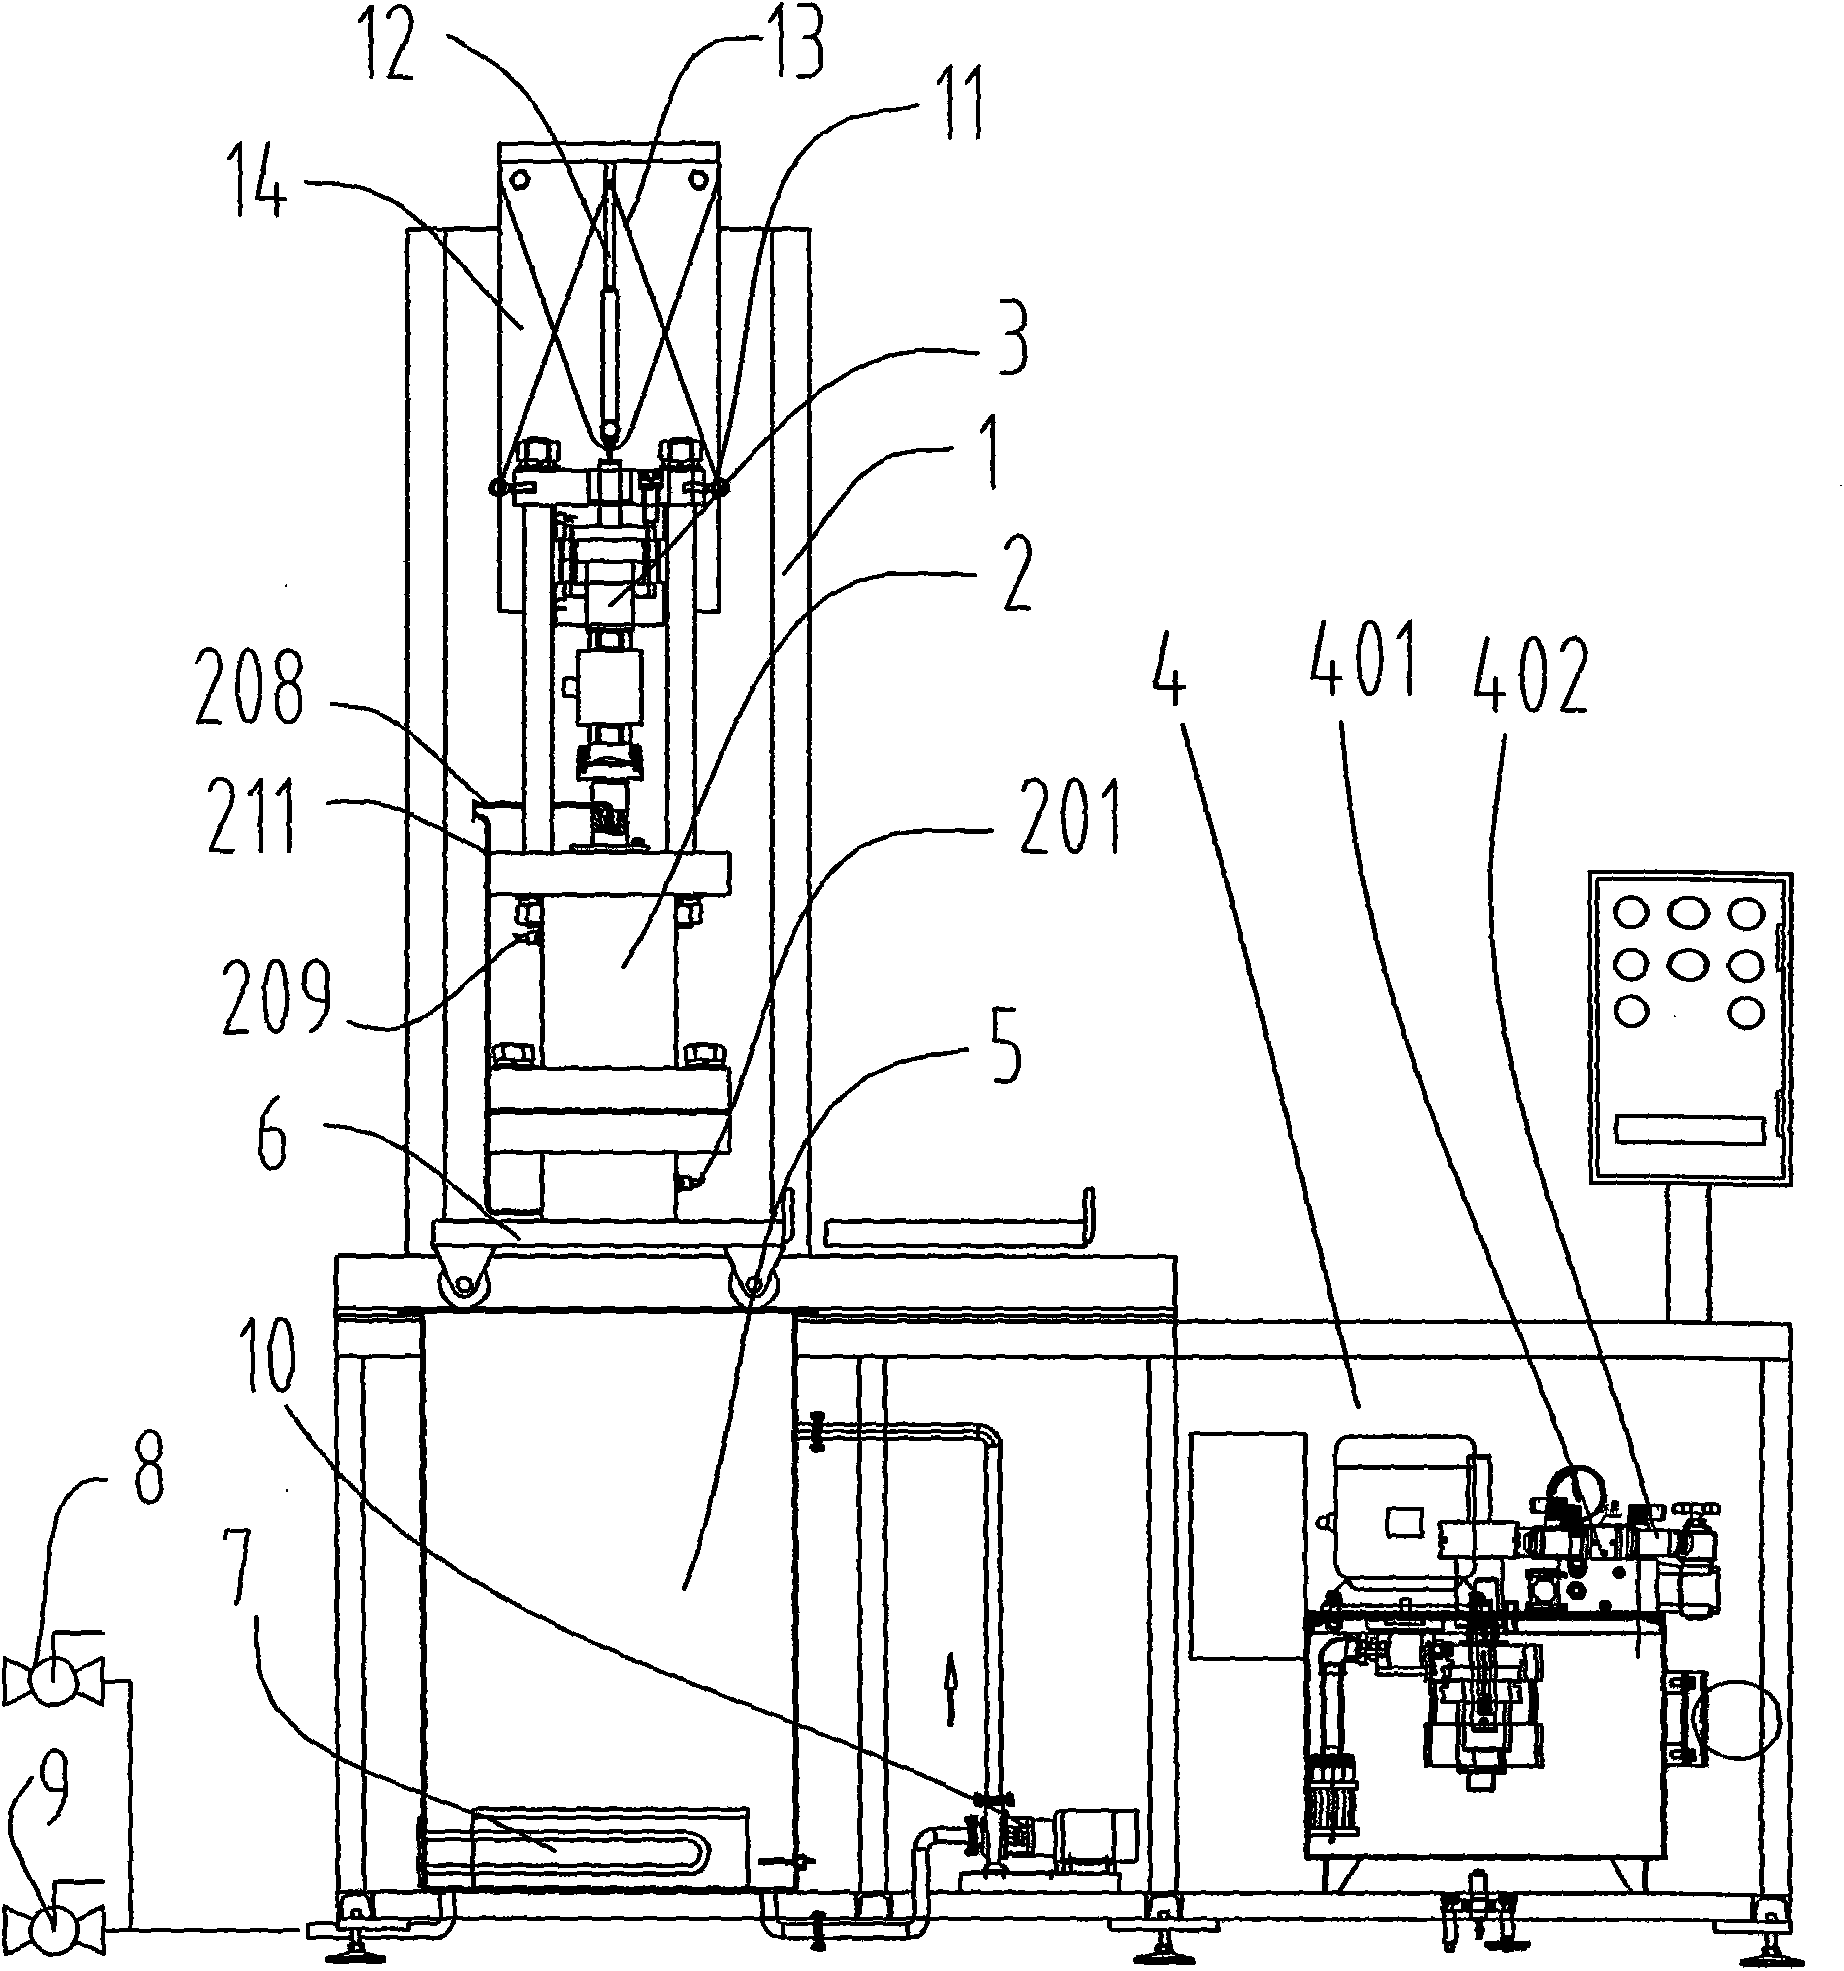 Fluid-solid-heat coupling triaxial servo percolation device for gas-contained coal